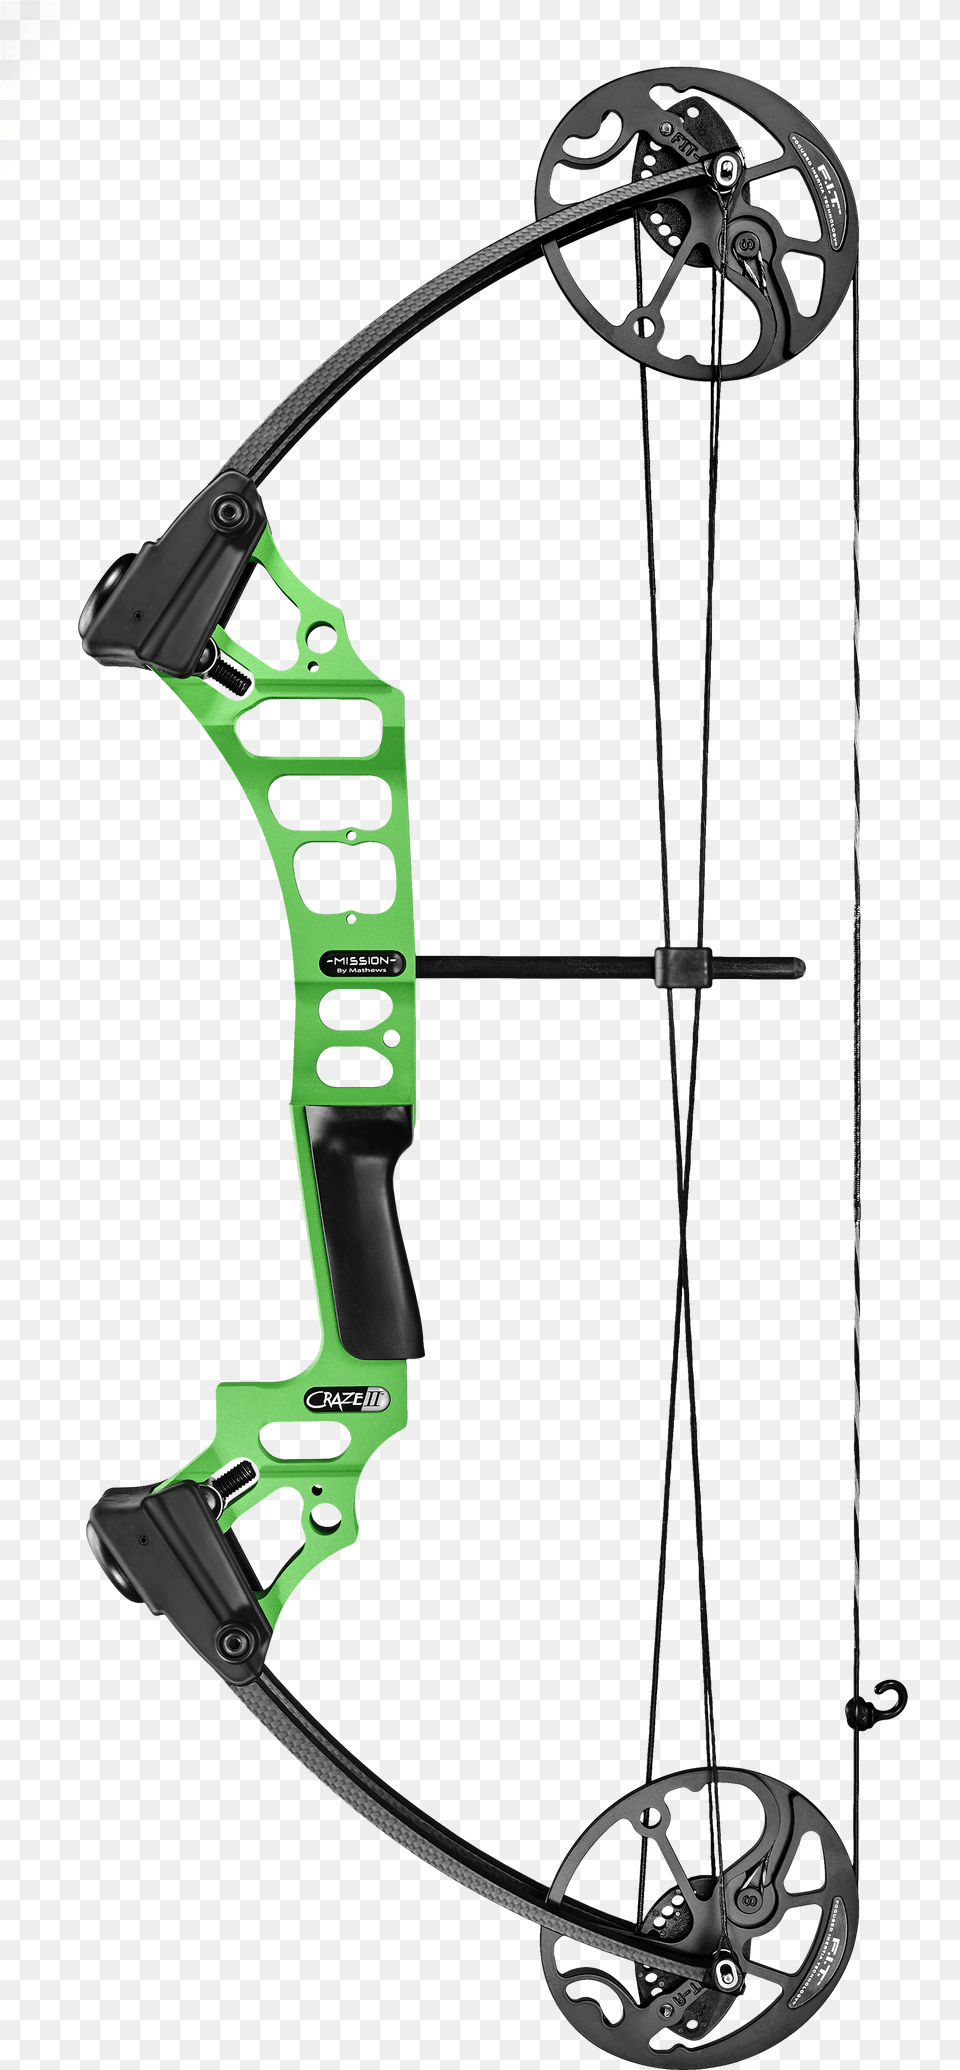 Atmosphere Drawing Easy Mission Zone Compound Bow, Weapon, Machine, Wheel Png Image